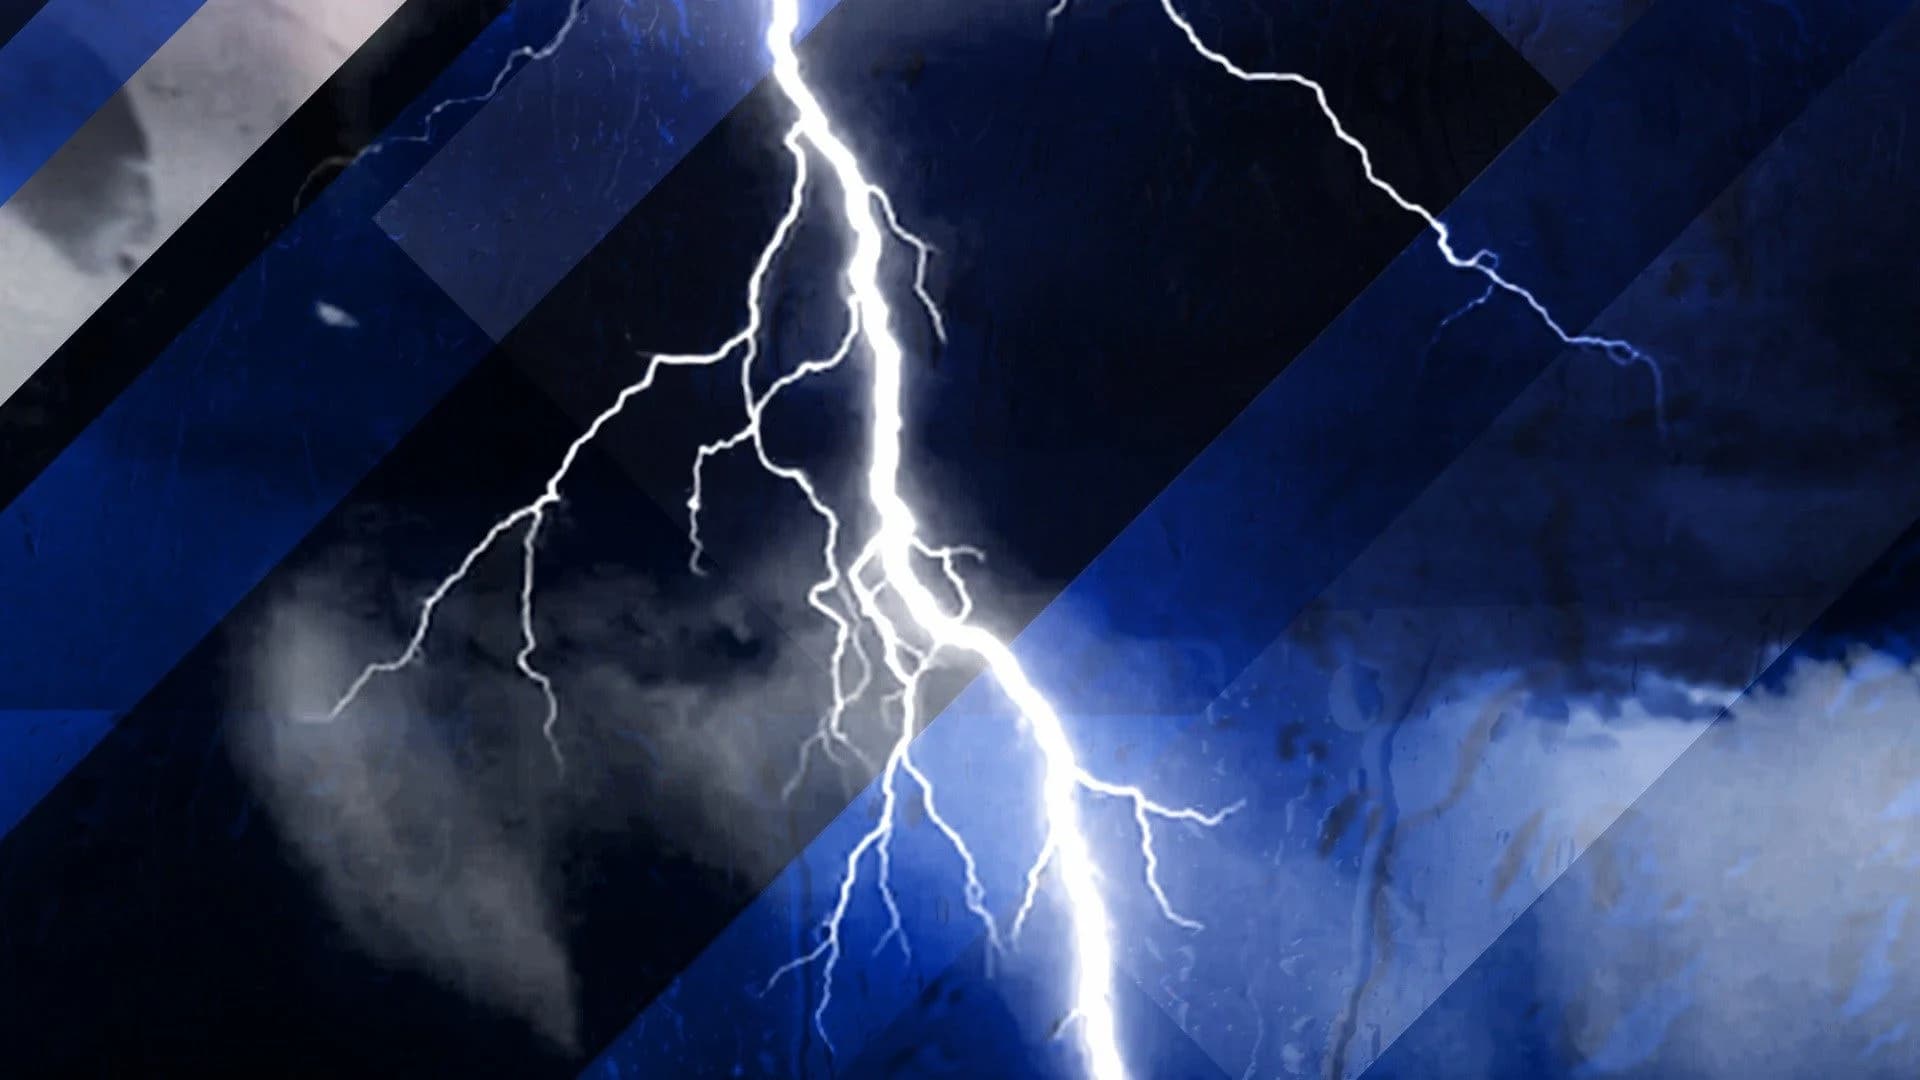 Men struck by lightning while playing soccer in New York